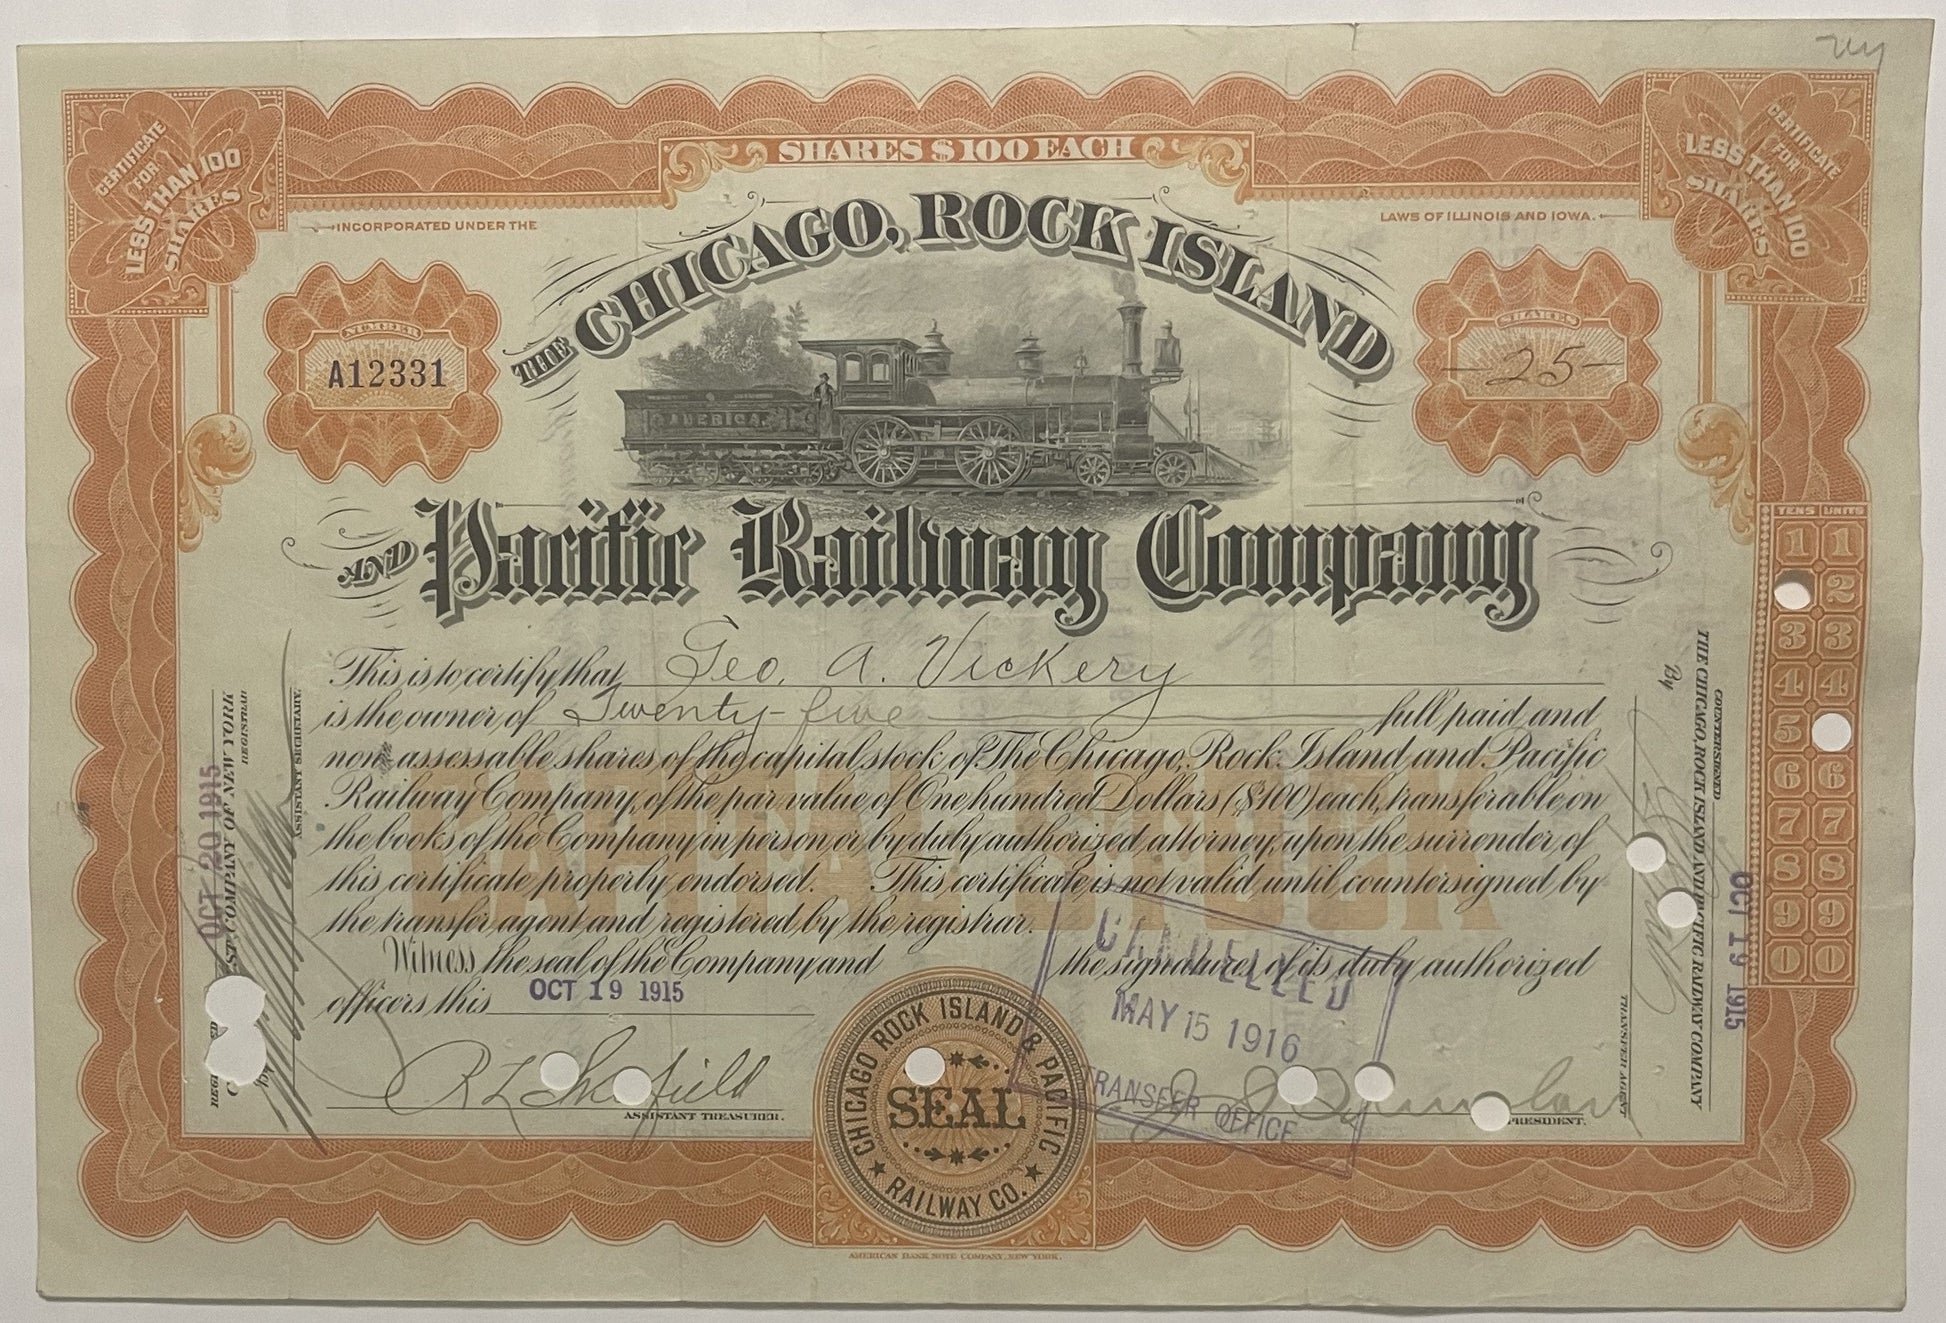 Antique 1915 Chicago Rock Island Pacific Railroad Stock Certificate Collectibles Vintage and Gifts Home page